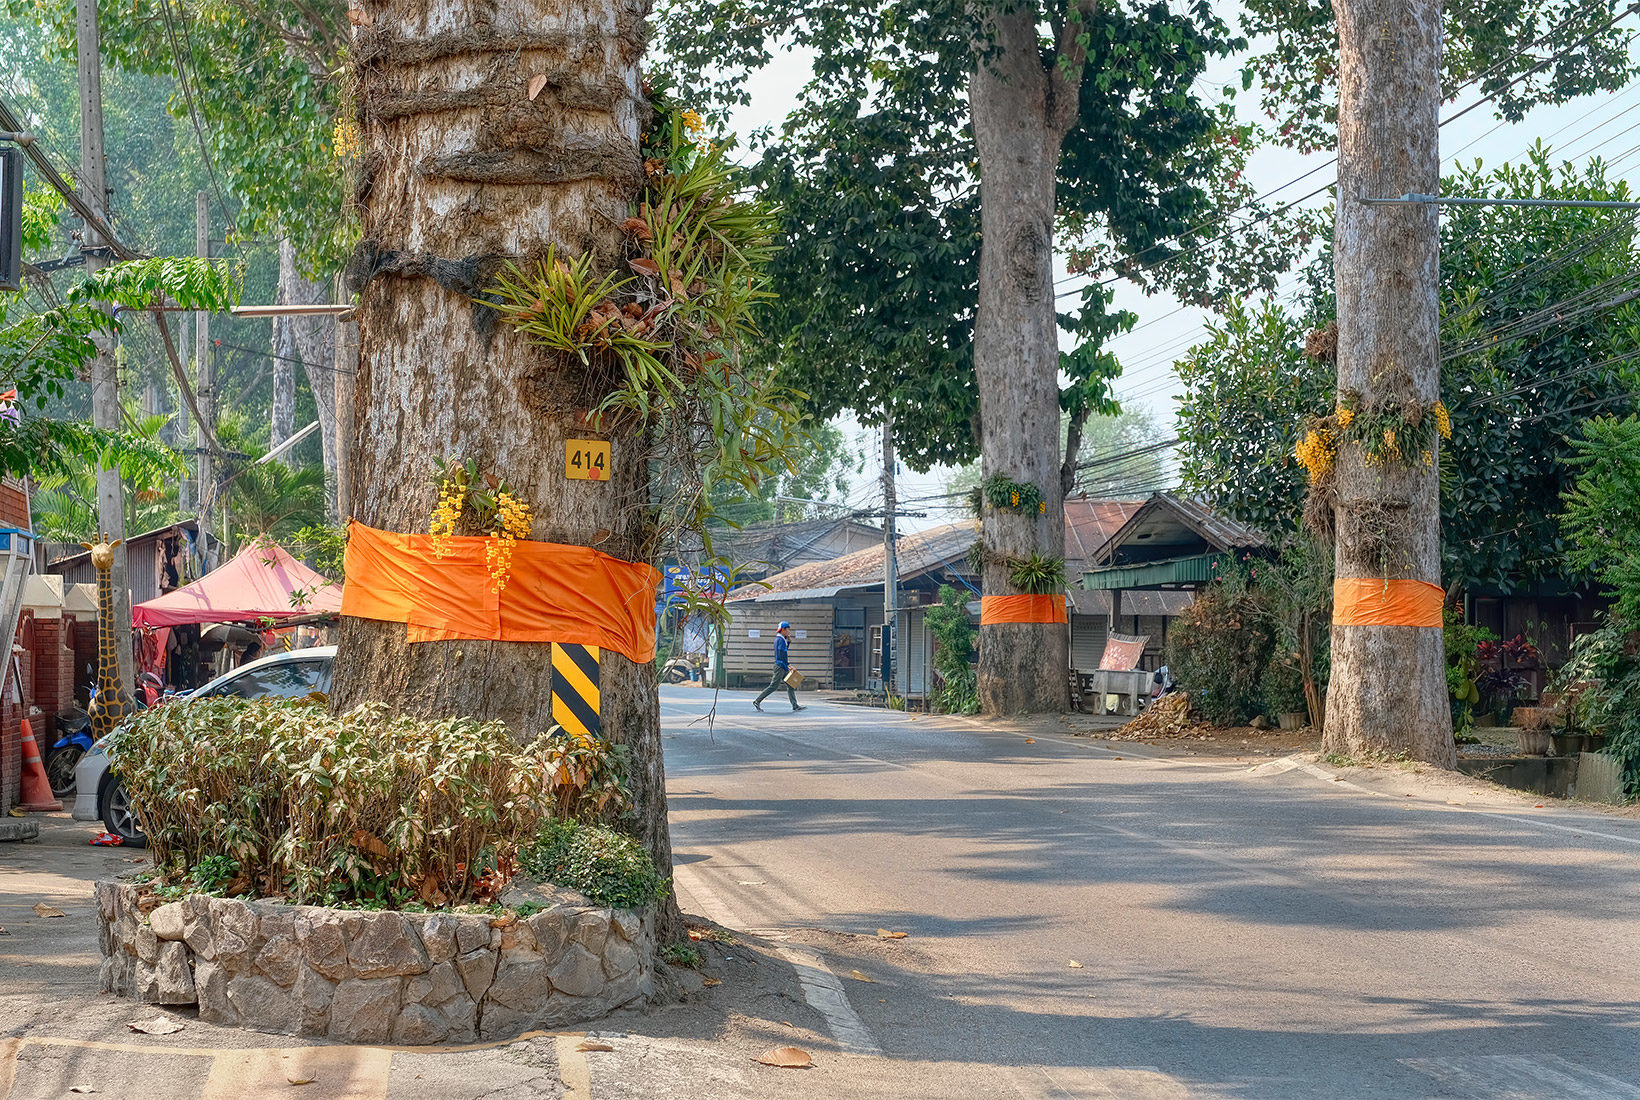 Dton Yaang Naa Trees along Chinag Mai-Lamphun Road have been ordained by wrapping them in saffron monk's robes, ensuring they will not be cut down